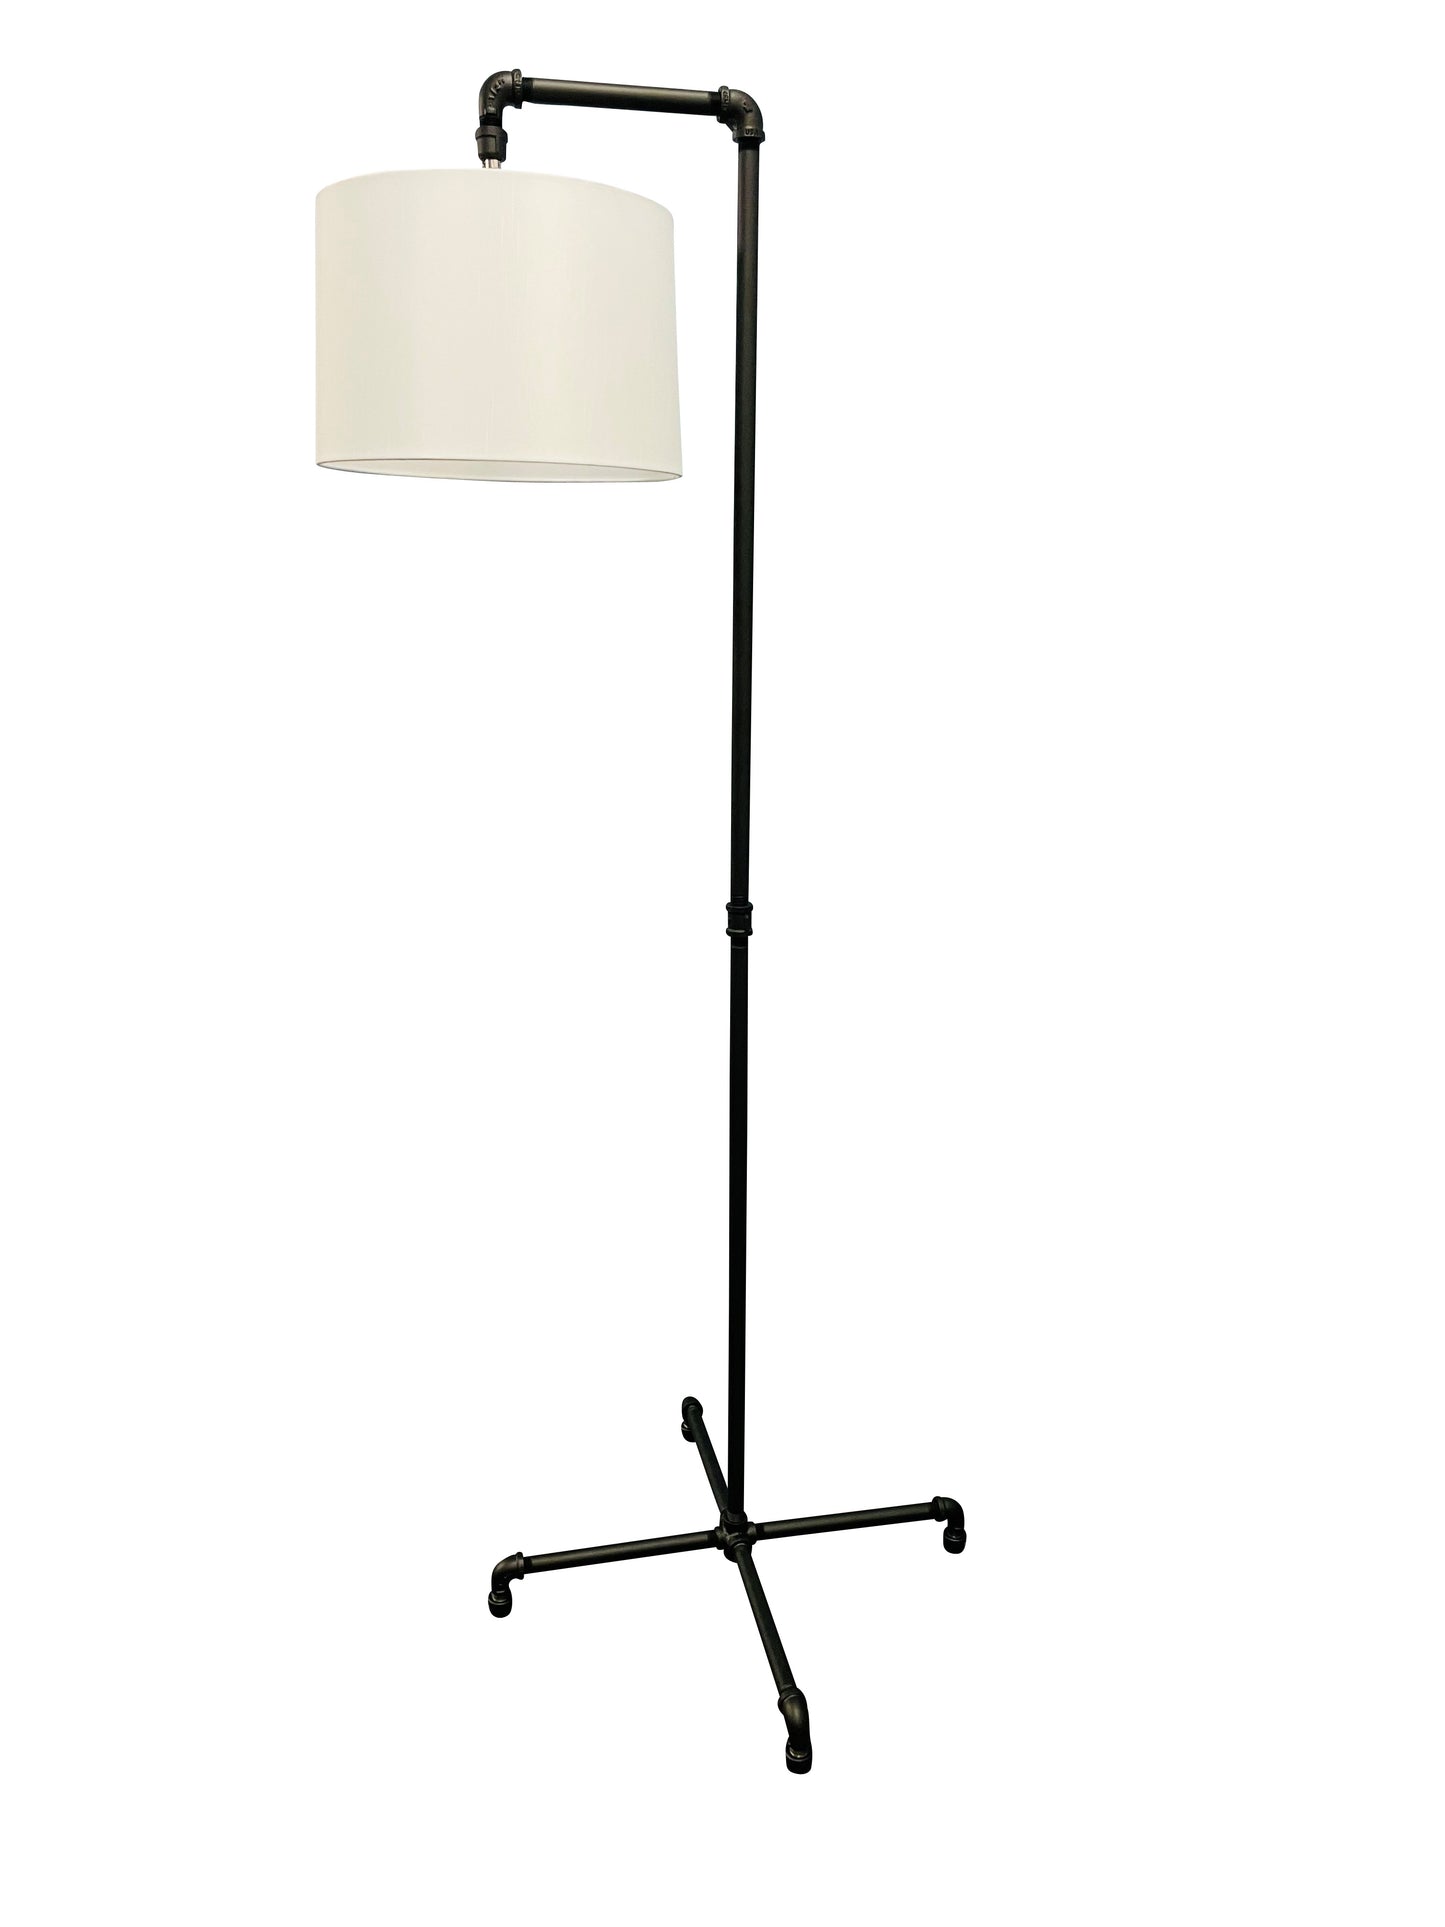 House of Troy Studio industrial black downbridge floor lamp with fabric shade ST601-BLK